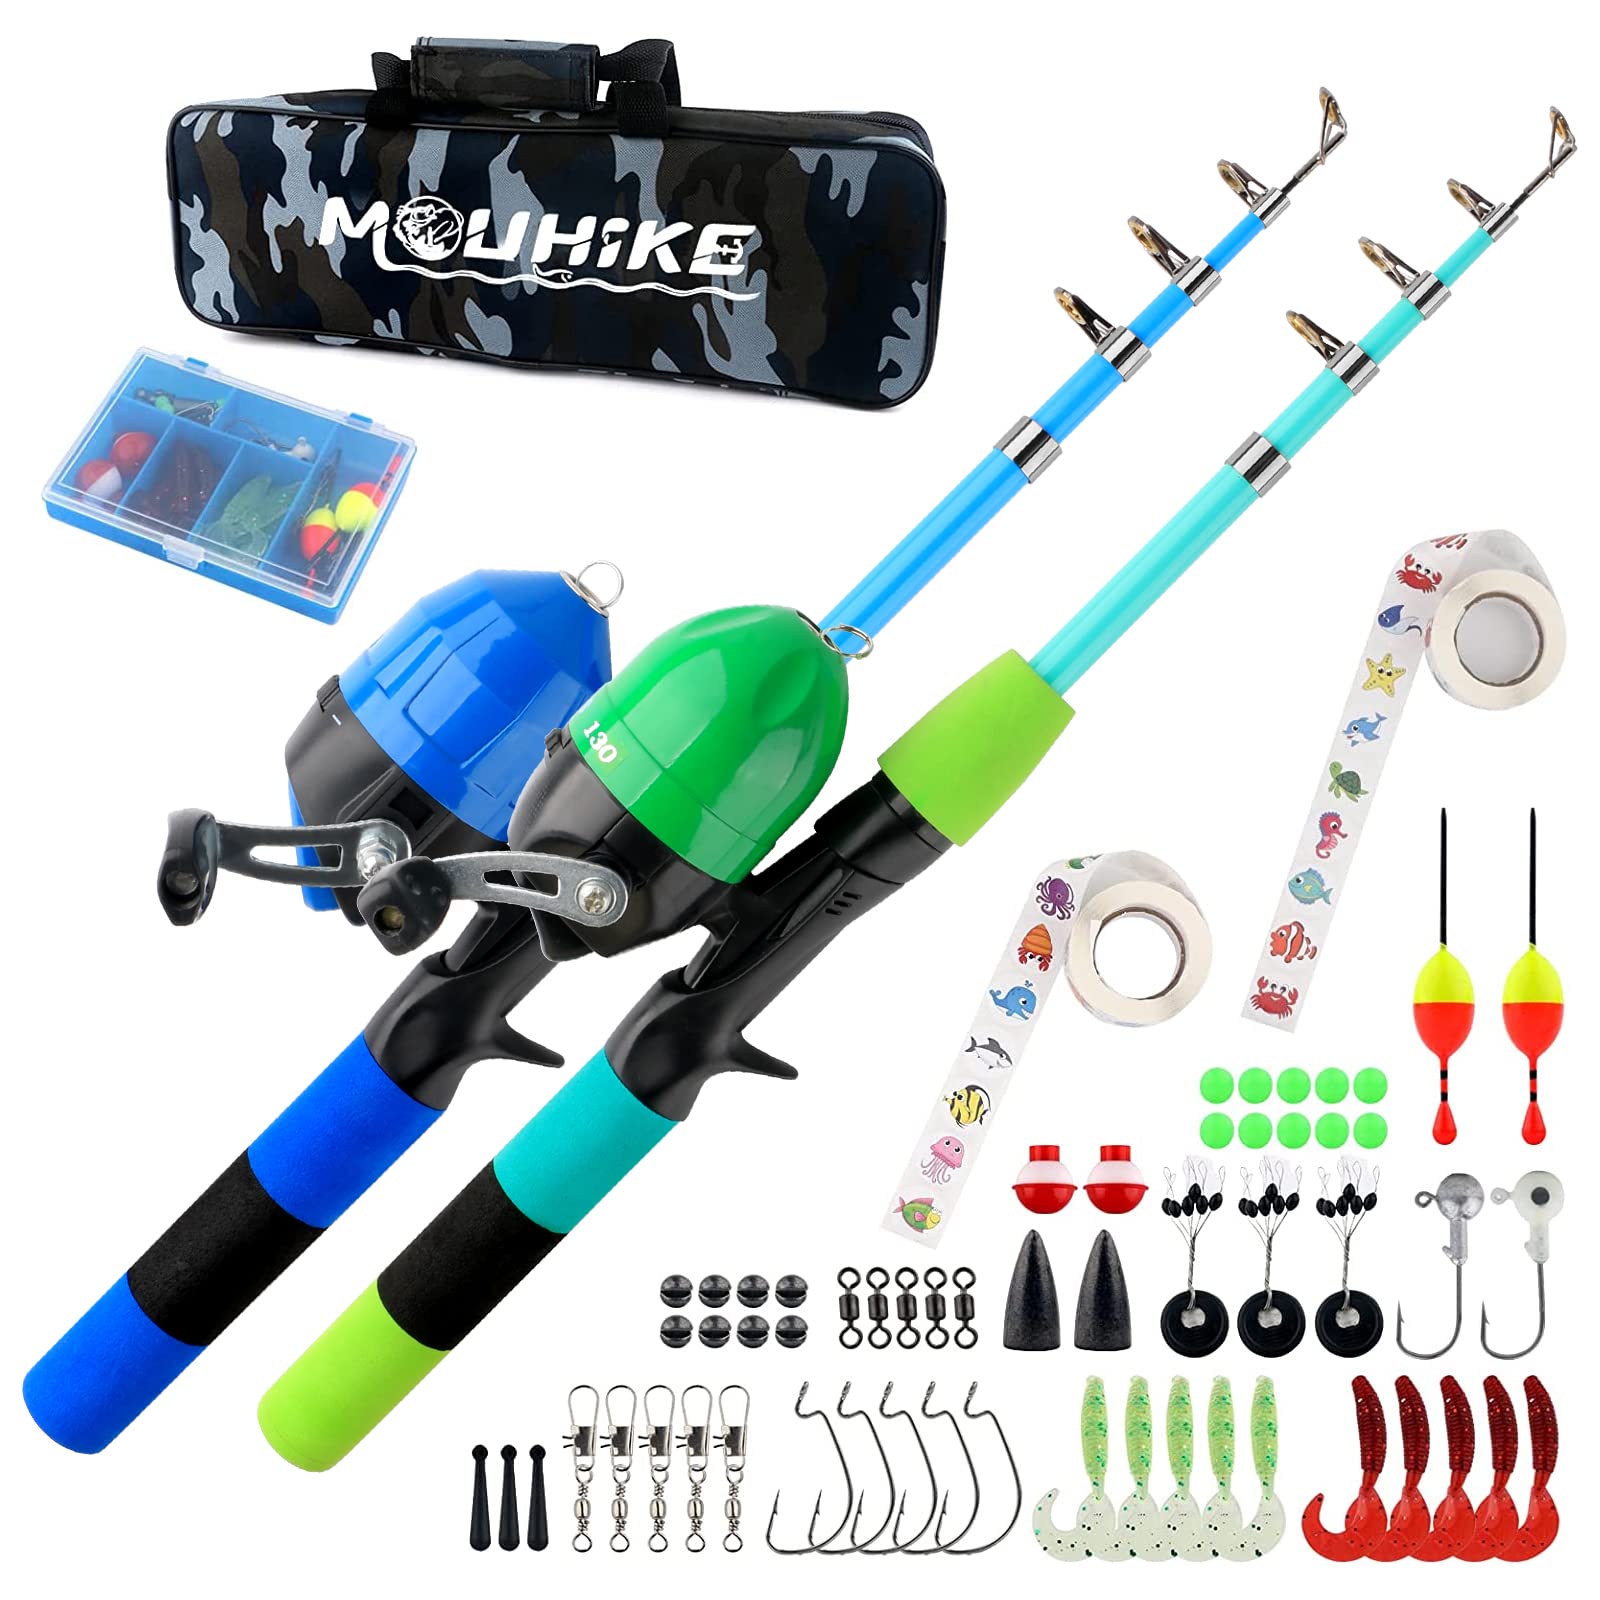 Kids Fishing Pole Kit, 59'' Telescopic Rod and Reel Beginner Combo with  Spincast Reel,Tackle Box, Carrier Bag,Fishing Gear Gifts for Boys,Girls